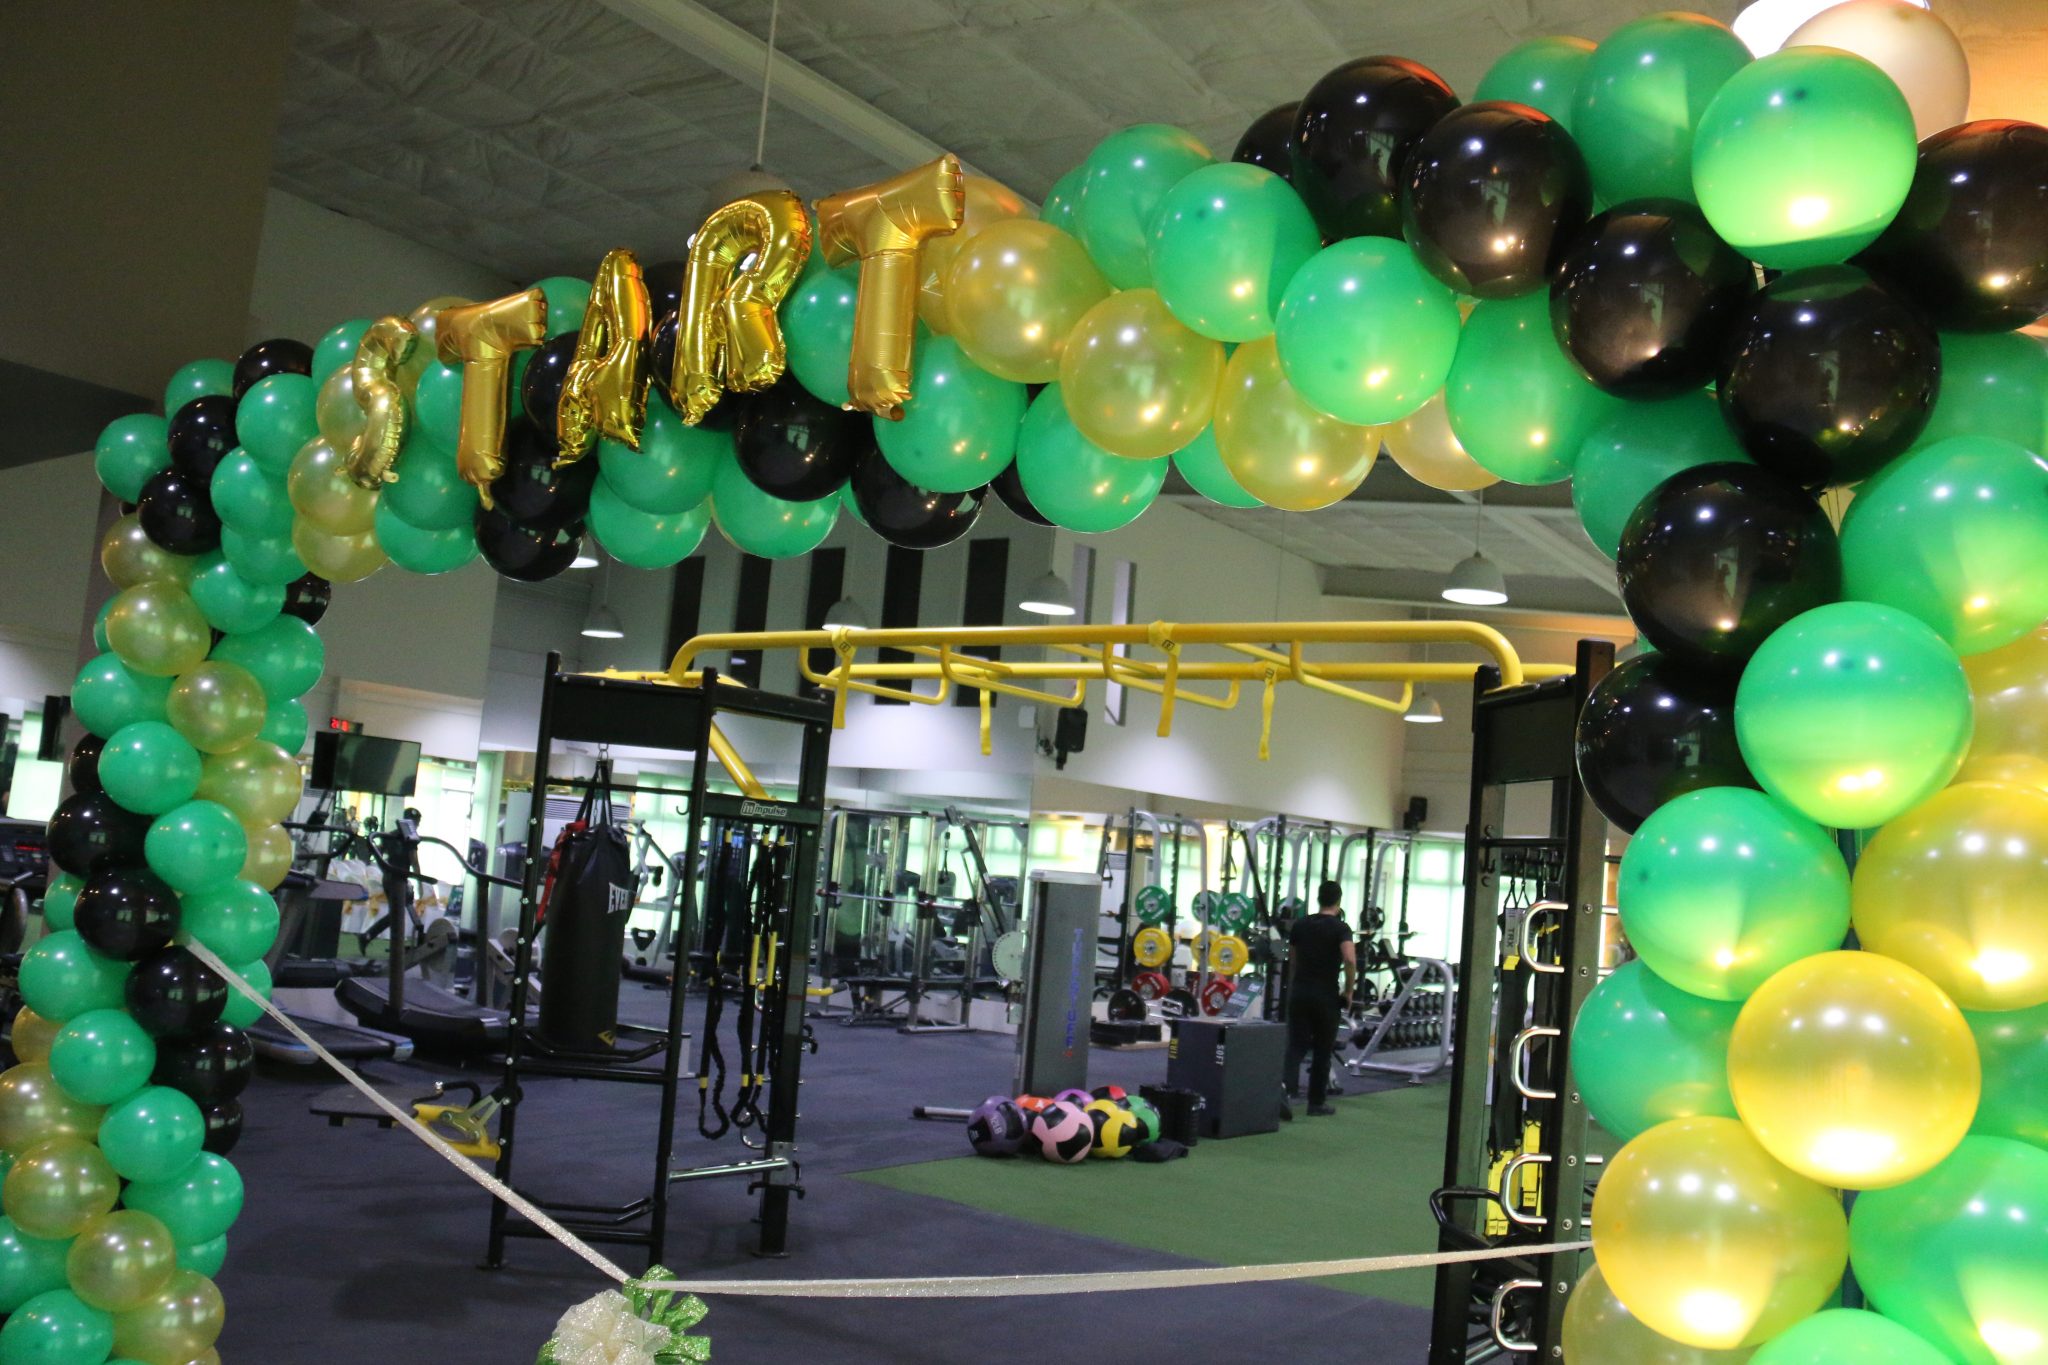 Santé Fitness Lab calls its fitness center as the "Home of Champions"